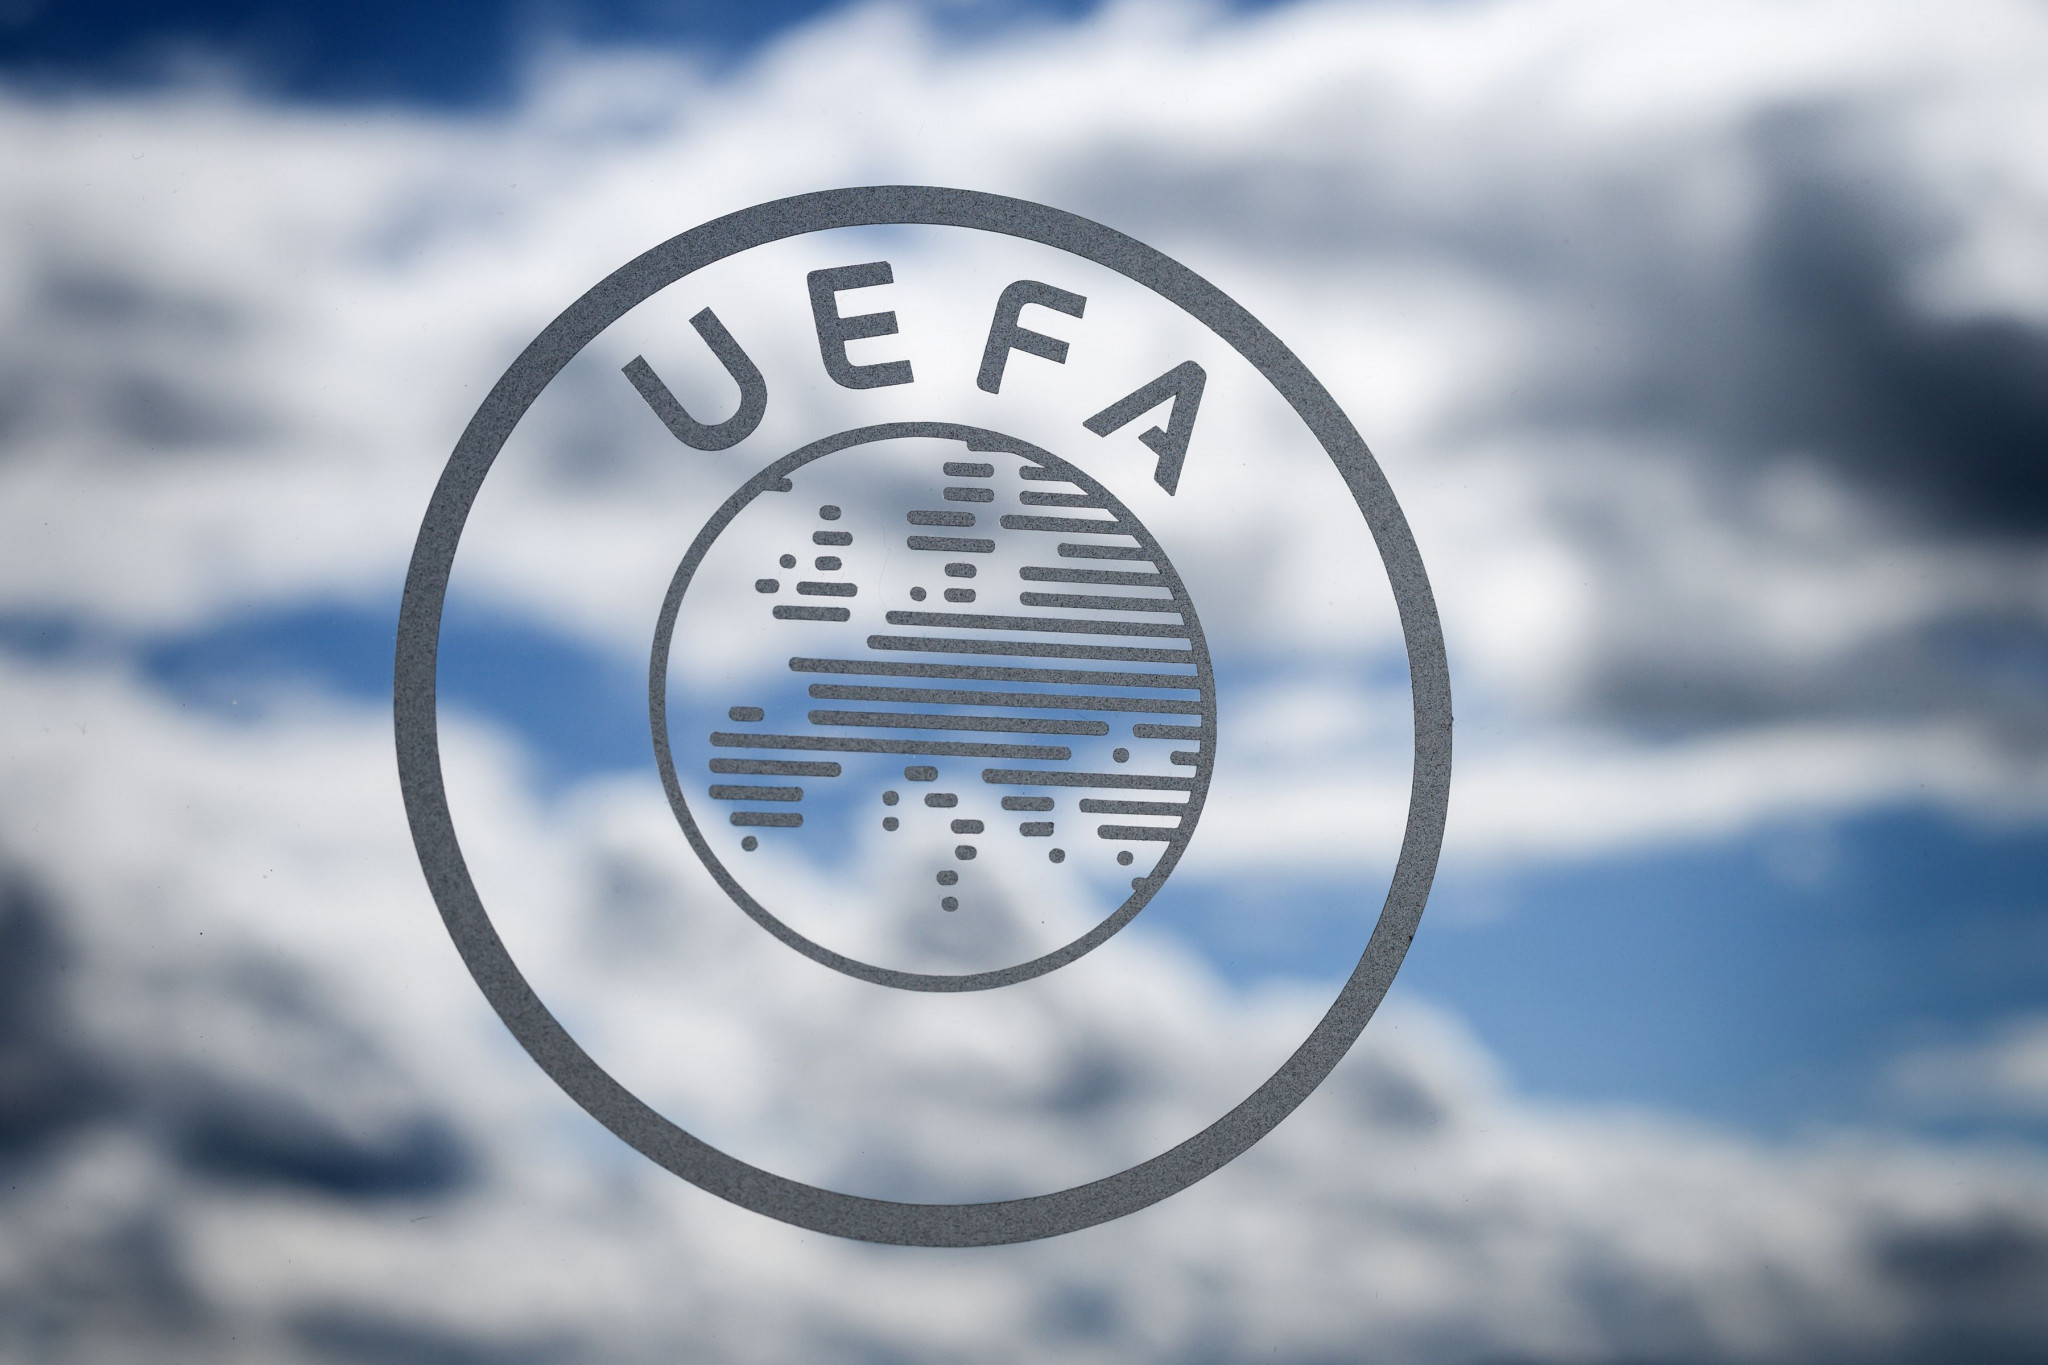 UEFA and FIFA defiant but plunged into crisis as 12 clubs commit to breakaway The Super League